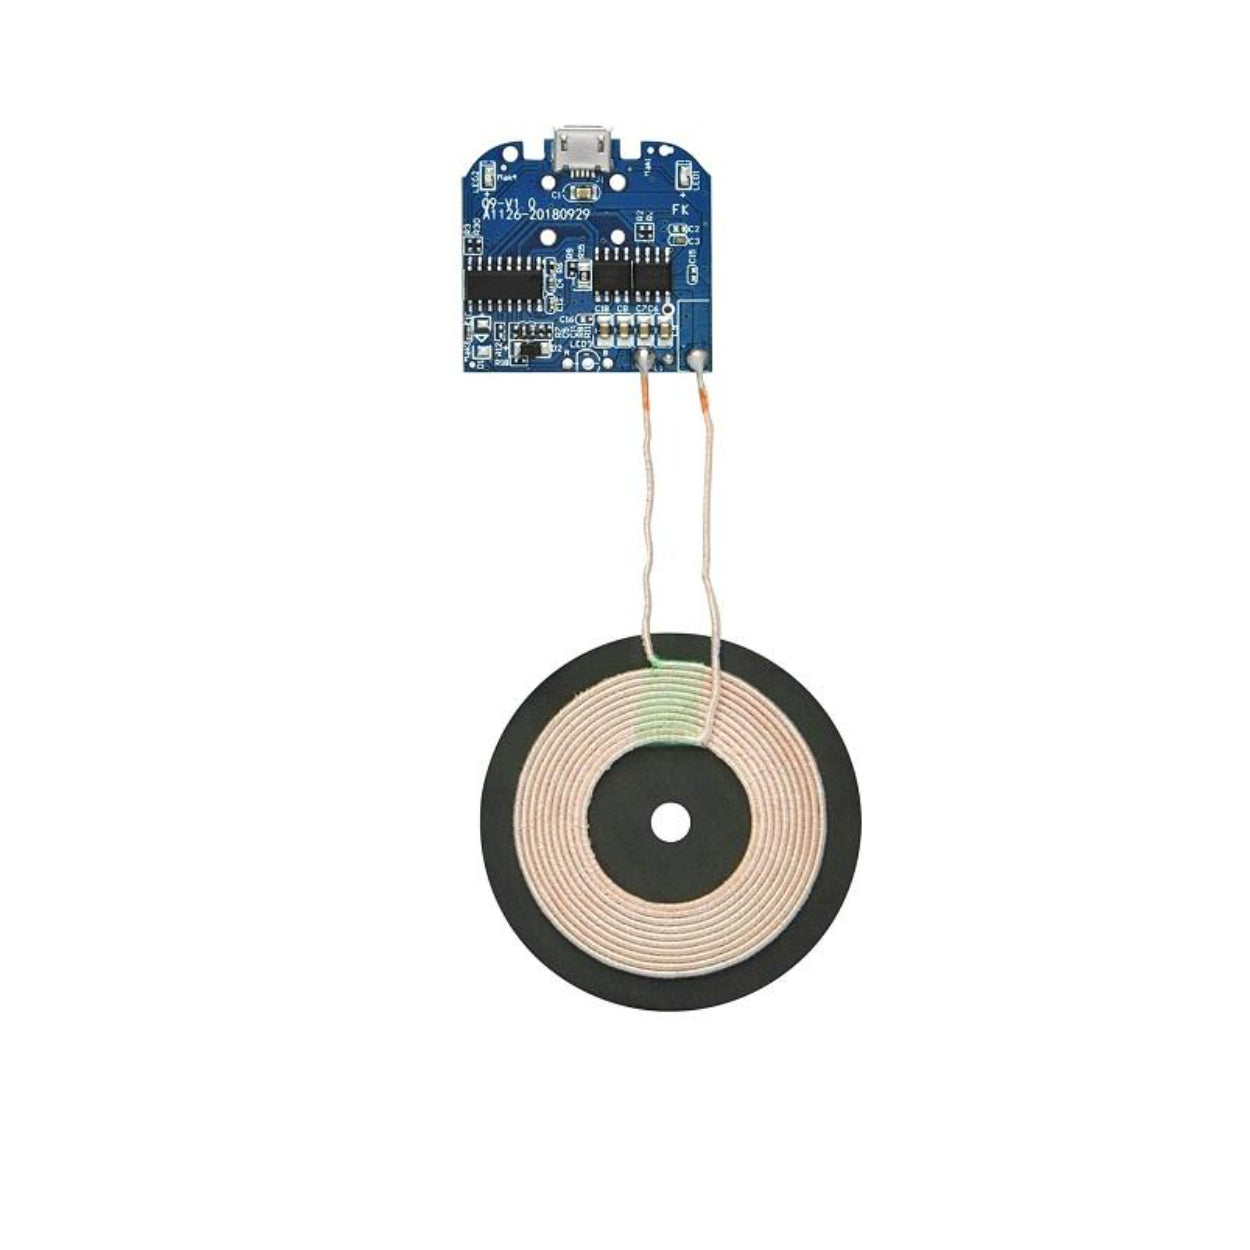 DC 5V Qi Standard Micro USB Input PCBA Circuit Board With Coil for Wireless Phone Charging (Transmitter)